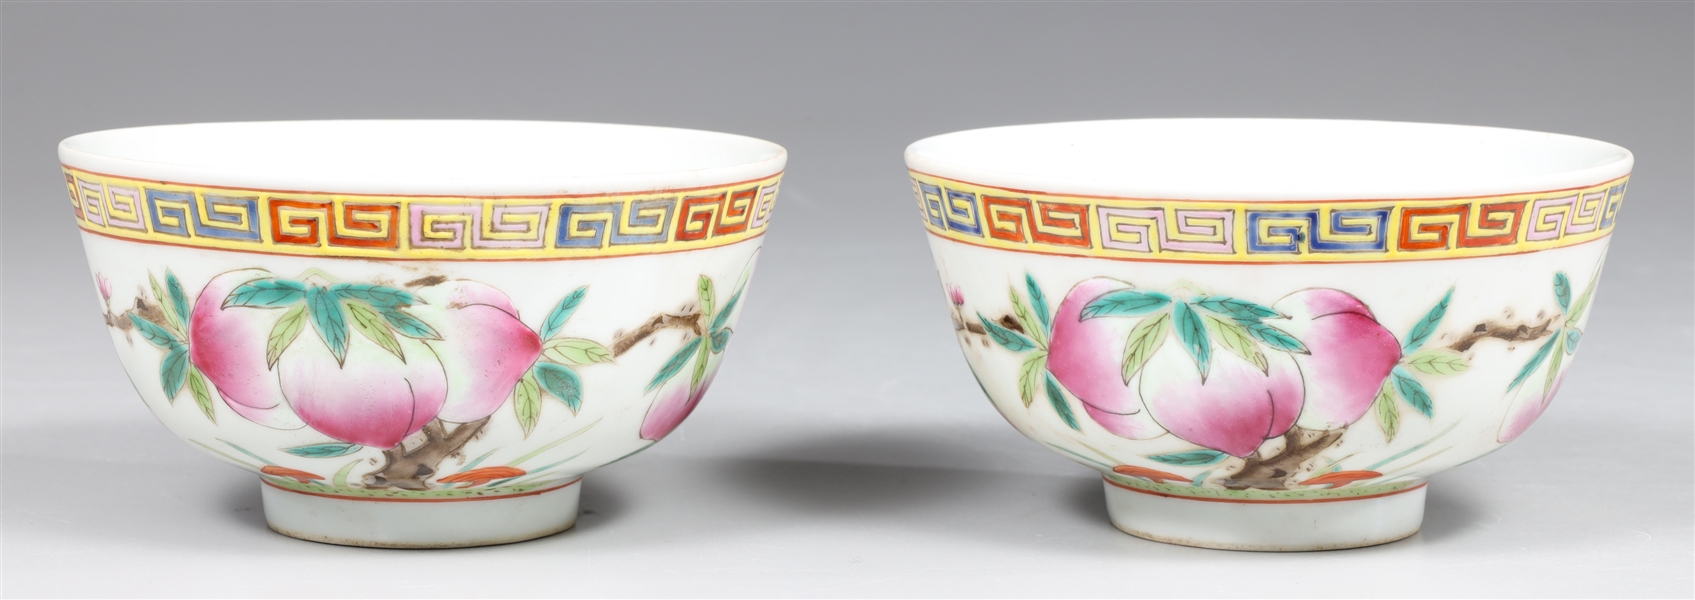 Pair of Chinese Enameled Porcelain Bowls